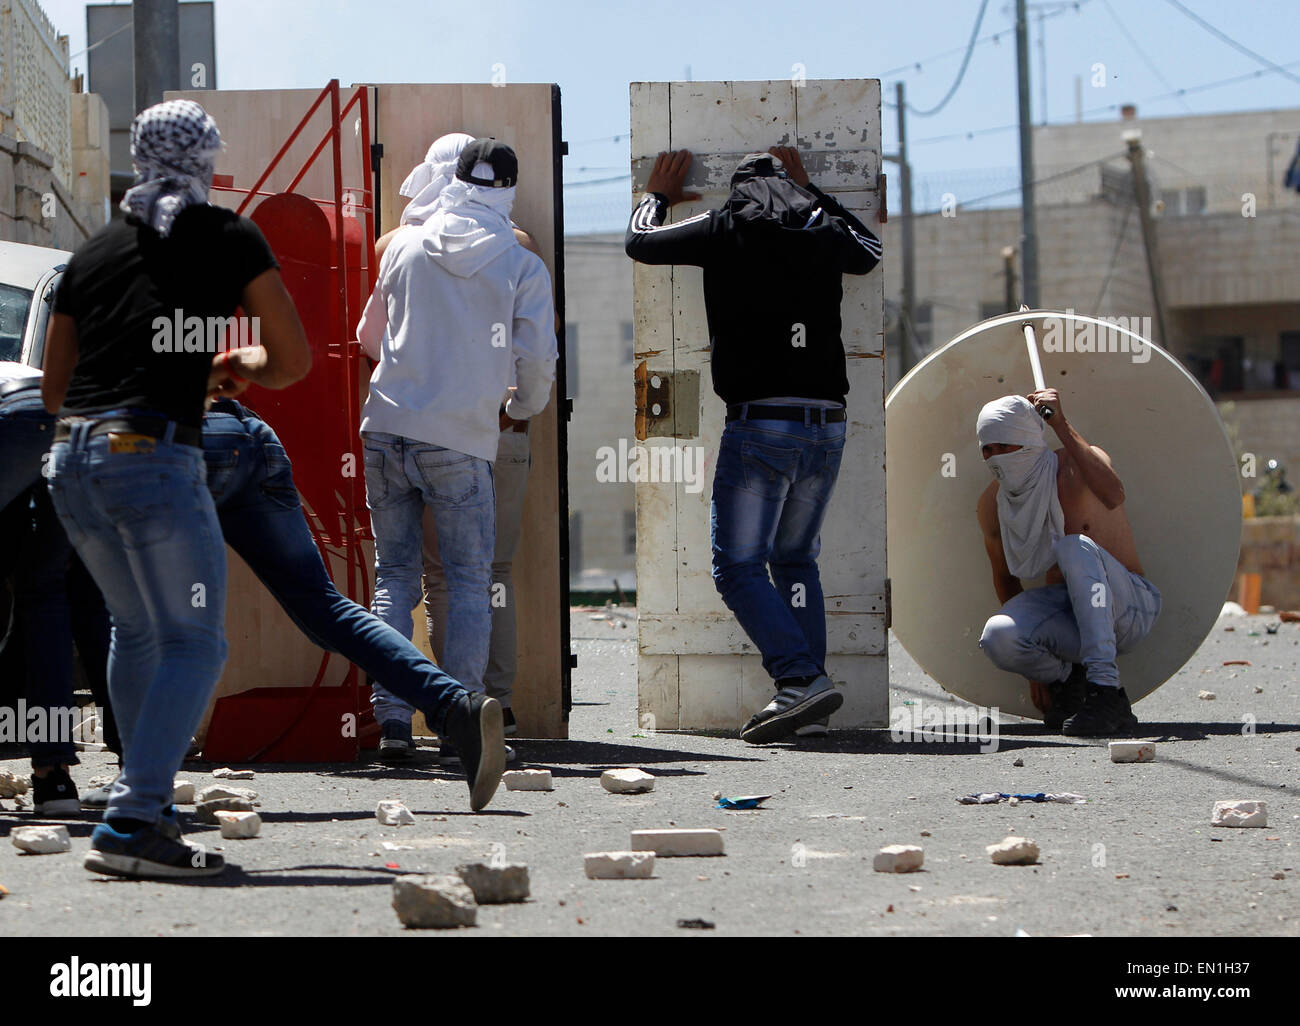 (150425) -- JERUSALEM, April 25, 2015 (Xinhua) -- Masked Palestinian youth take cover during clashes between Palestinians and Israeli security forces in Al-Tur neighbourhood of East Jerusalem, on April 25, 2015. Israeli paramilitary Border Police said Saturday that it shot dead a knife-wielding Palestinian youth near an east Jerusalem checkpoint after he attempted to attack them. Ali Said Abu Ghanam, a 16-year-old resident of the Palestinian neighborhood of At-Tur, started running toward the policemen at the A-Zayyim checkpoint Friday overnight, according to a police statement. (Xinhua/Muammar Stock Photo